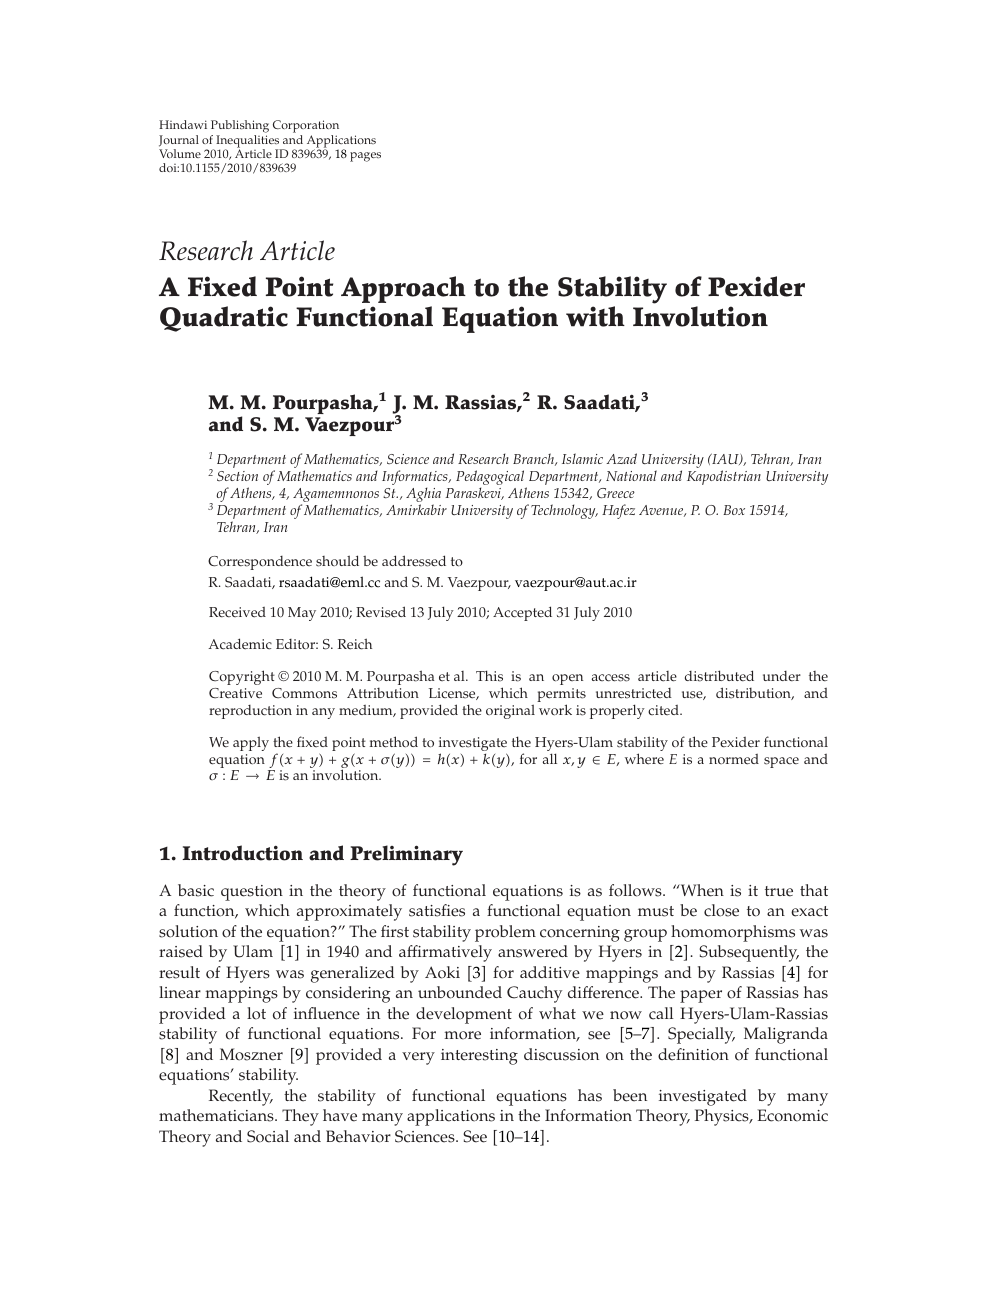 A Fixed Point Approach To The Stability Of Pexider Quadratic Functional Equation With Involution Topic Of Research Paper In Mathematics Download Scholarly Article Pdf And Read For Free On Cyberleninka Open